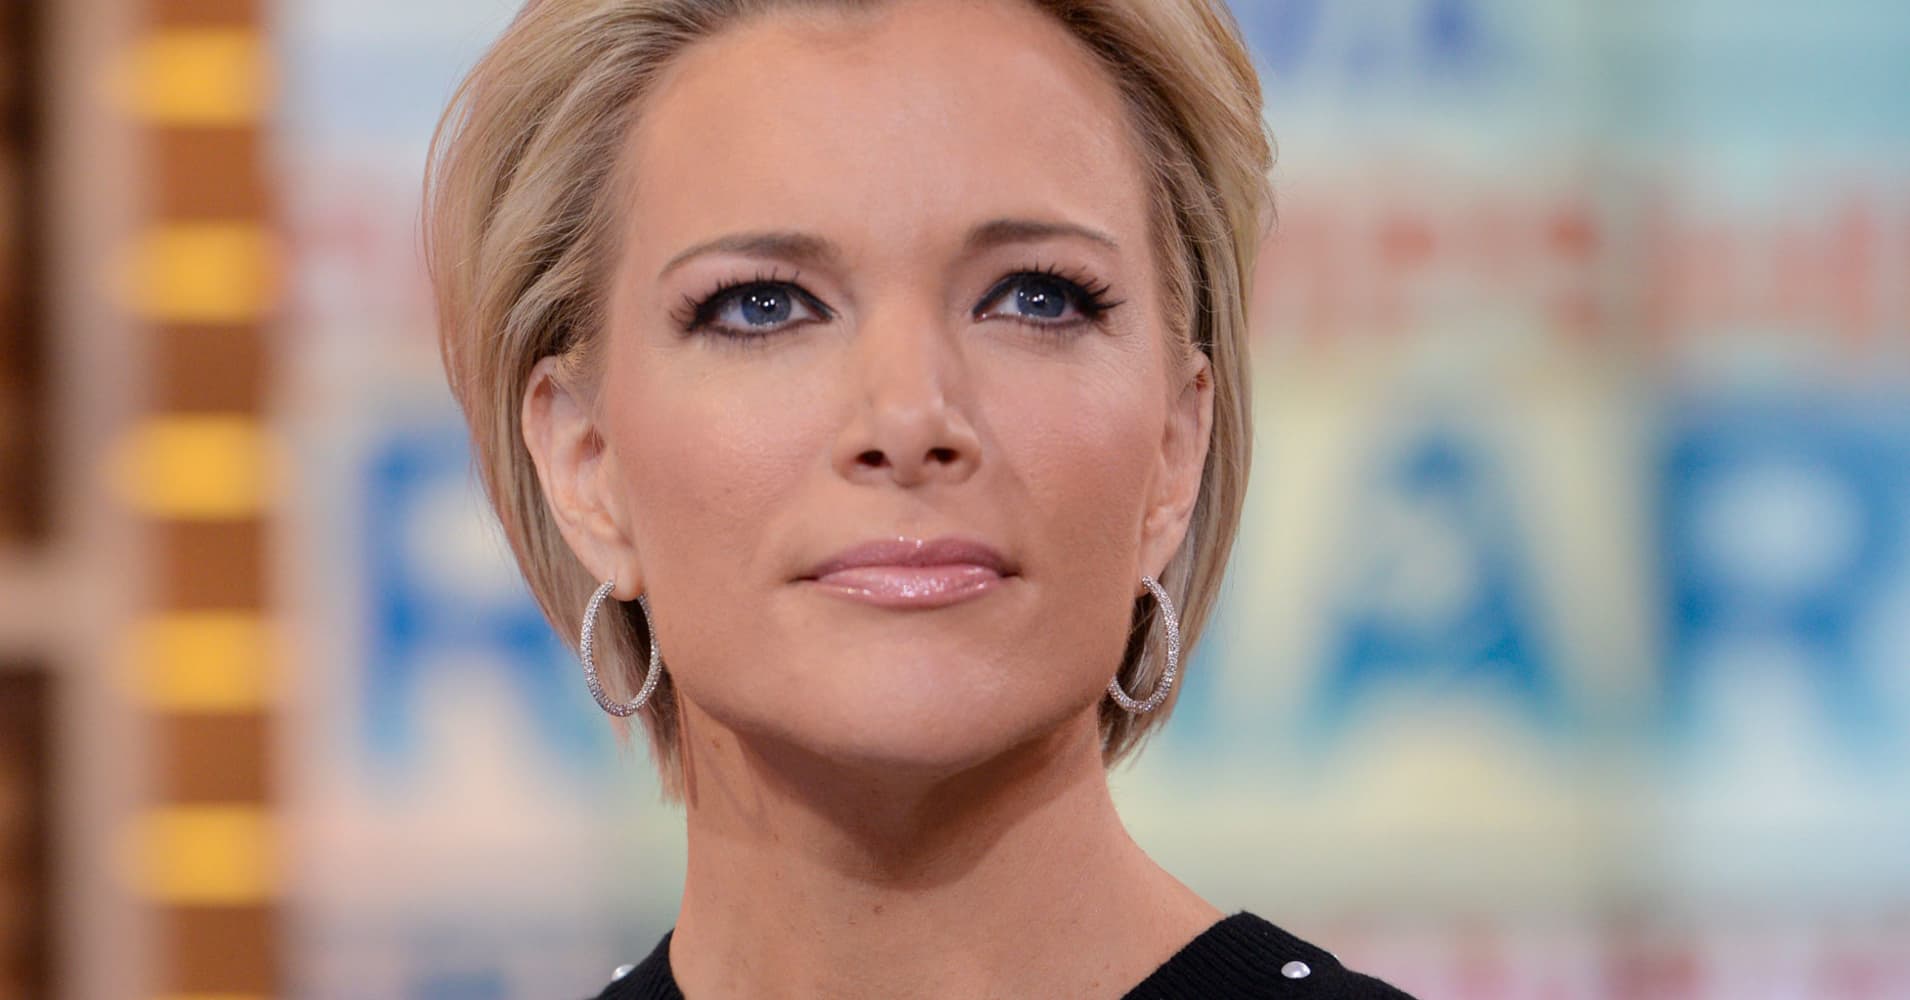 CNN trying to lure Fox News' Megyn Kelly, says Drudge Report - CNBC